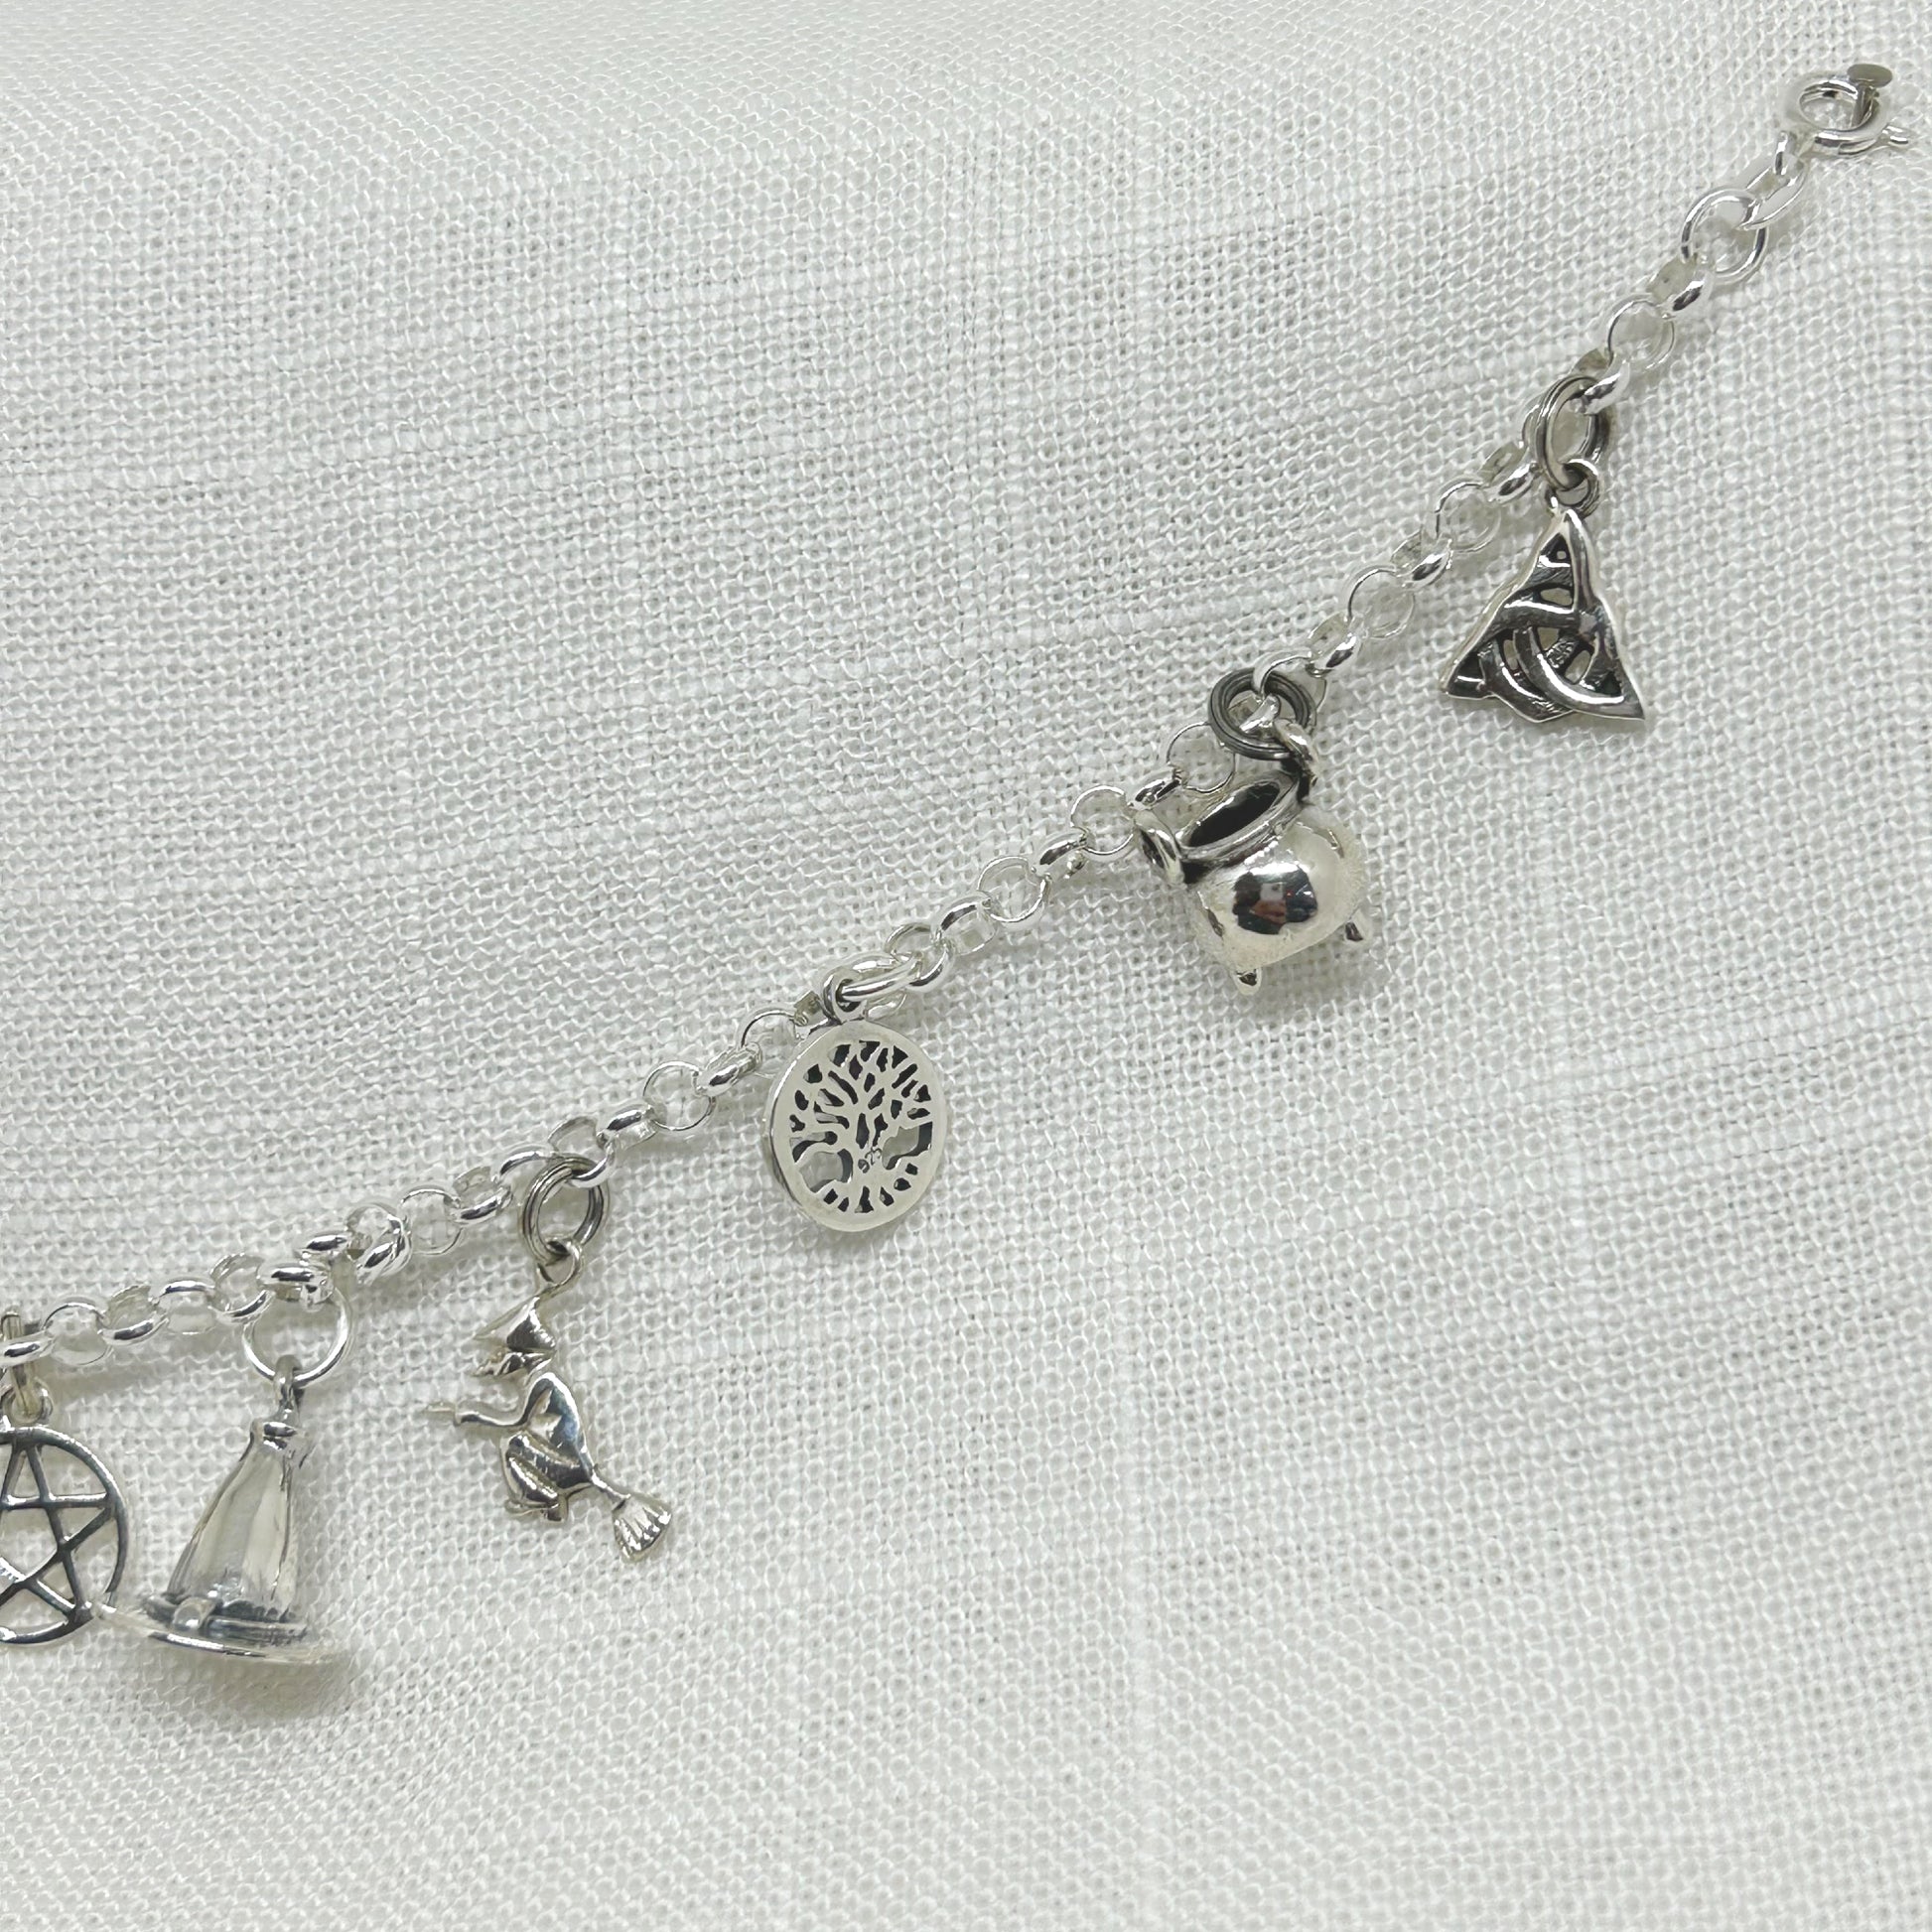 Witchy Charm Bracelets – The Silver Pentacle